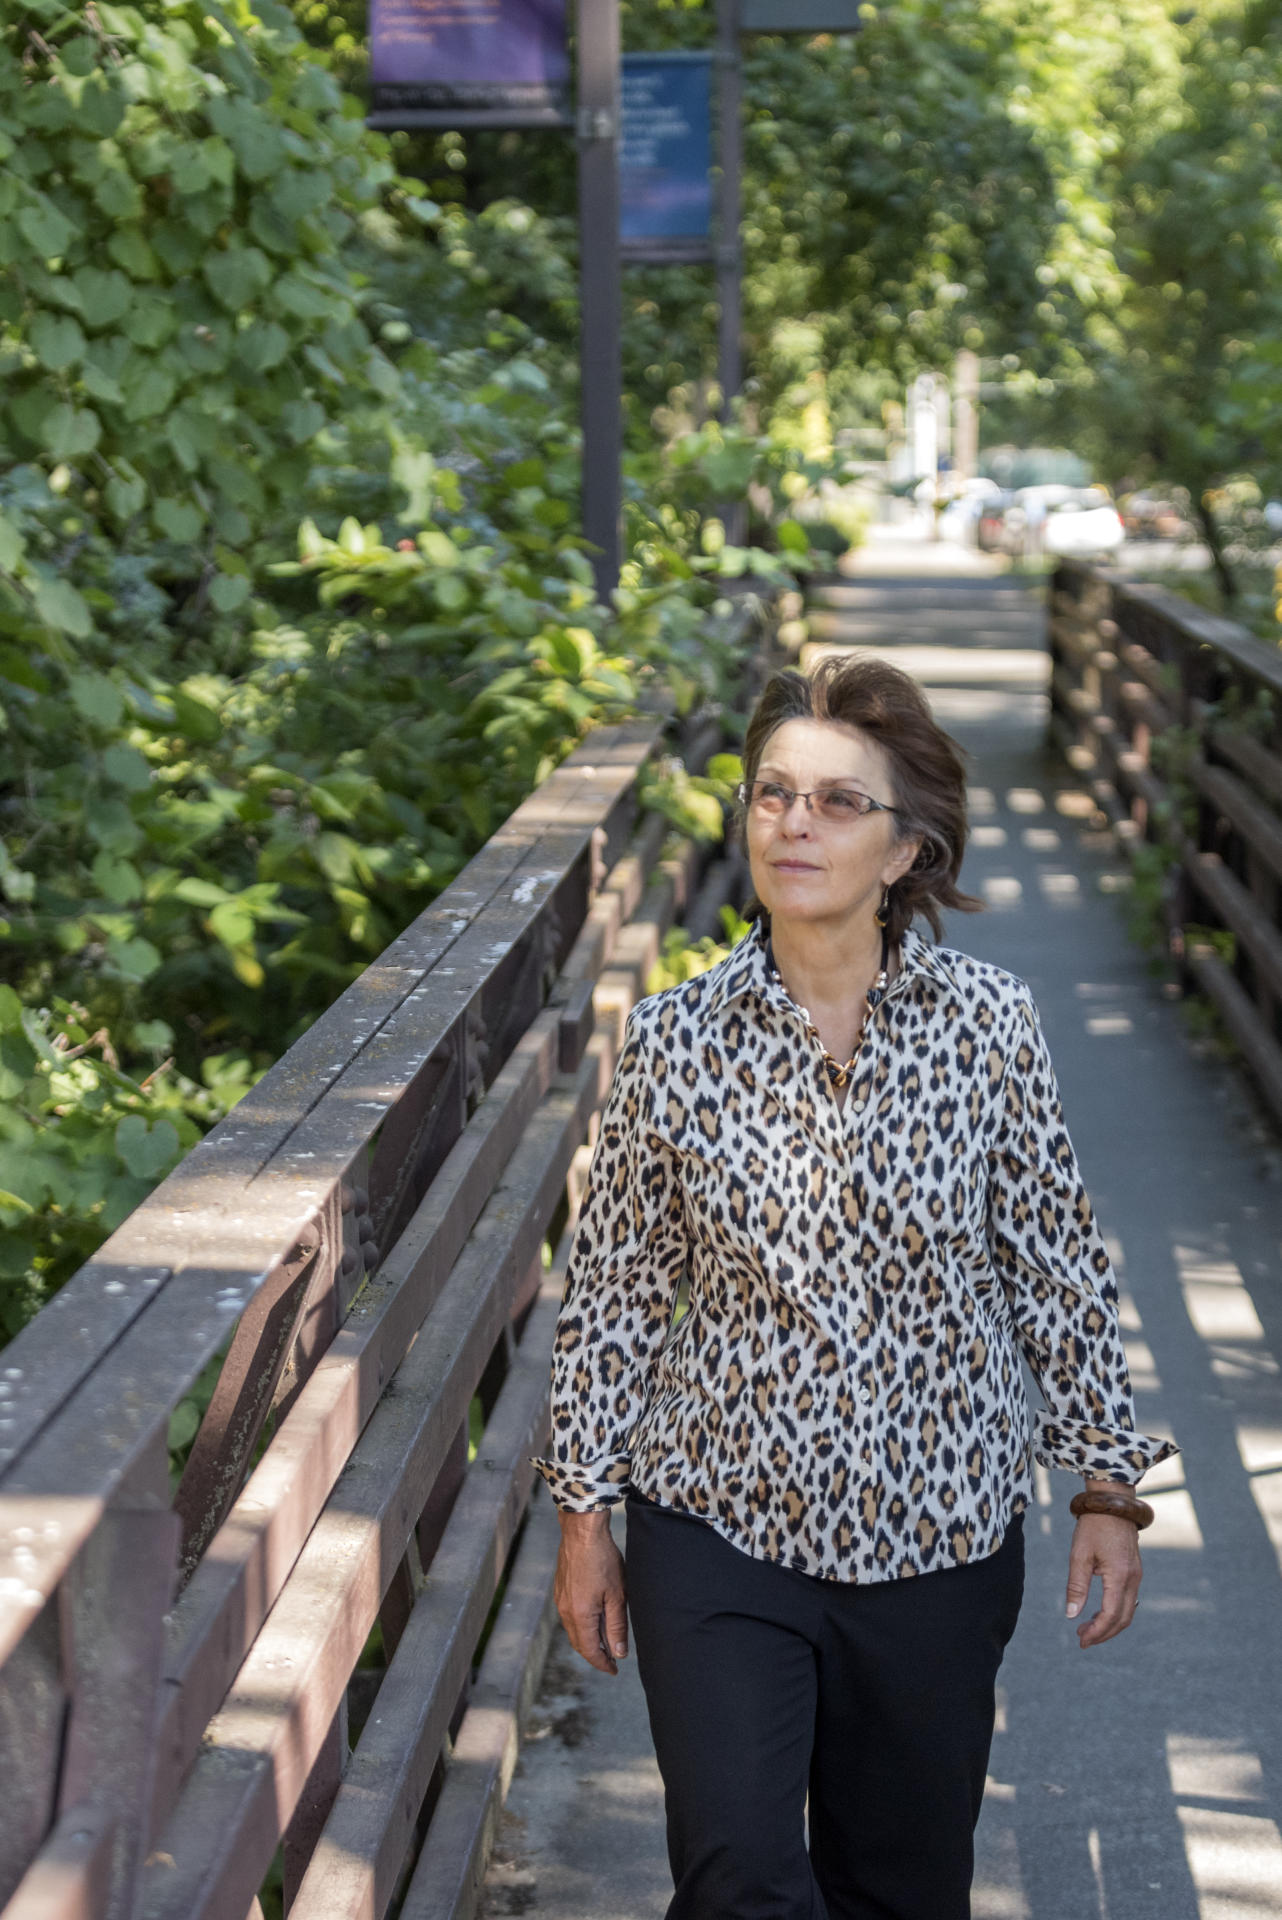 New President Gayle Hutchinson walks across a bridge around campus to greet staff on her official first day of work on Tuesday, July 5, 2016 in Chico, Calif. (Jason Halley/University Photographer)